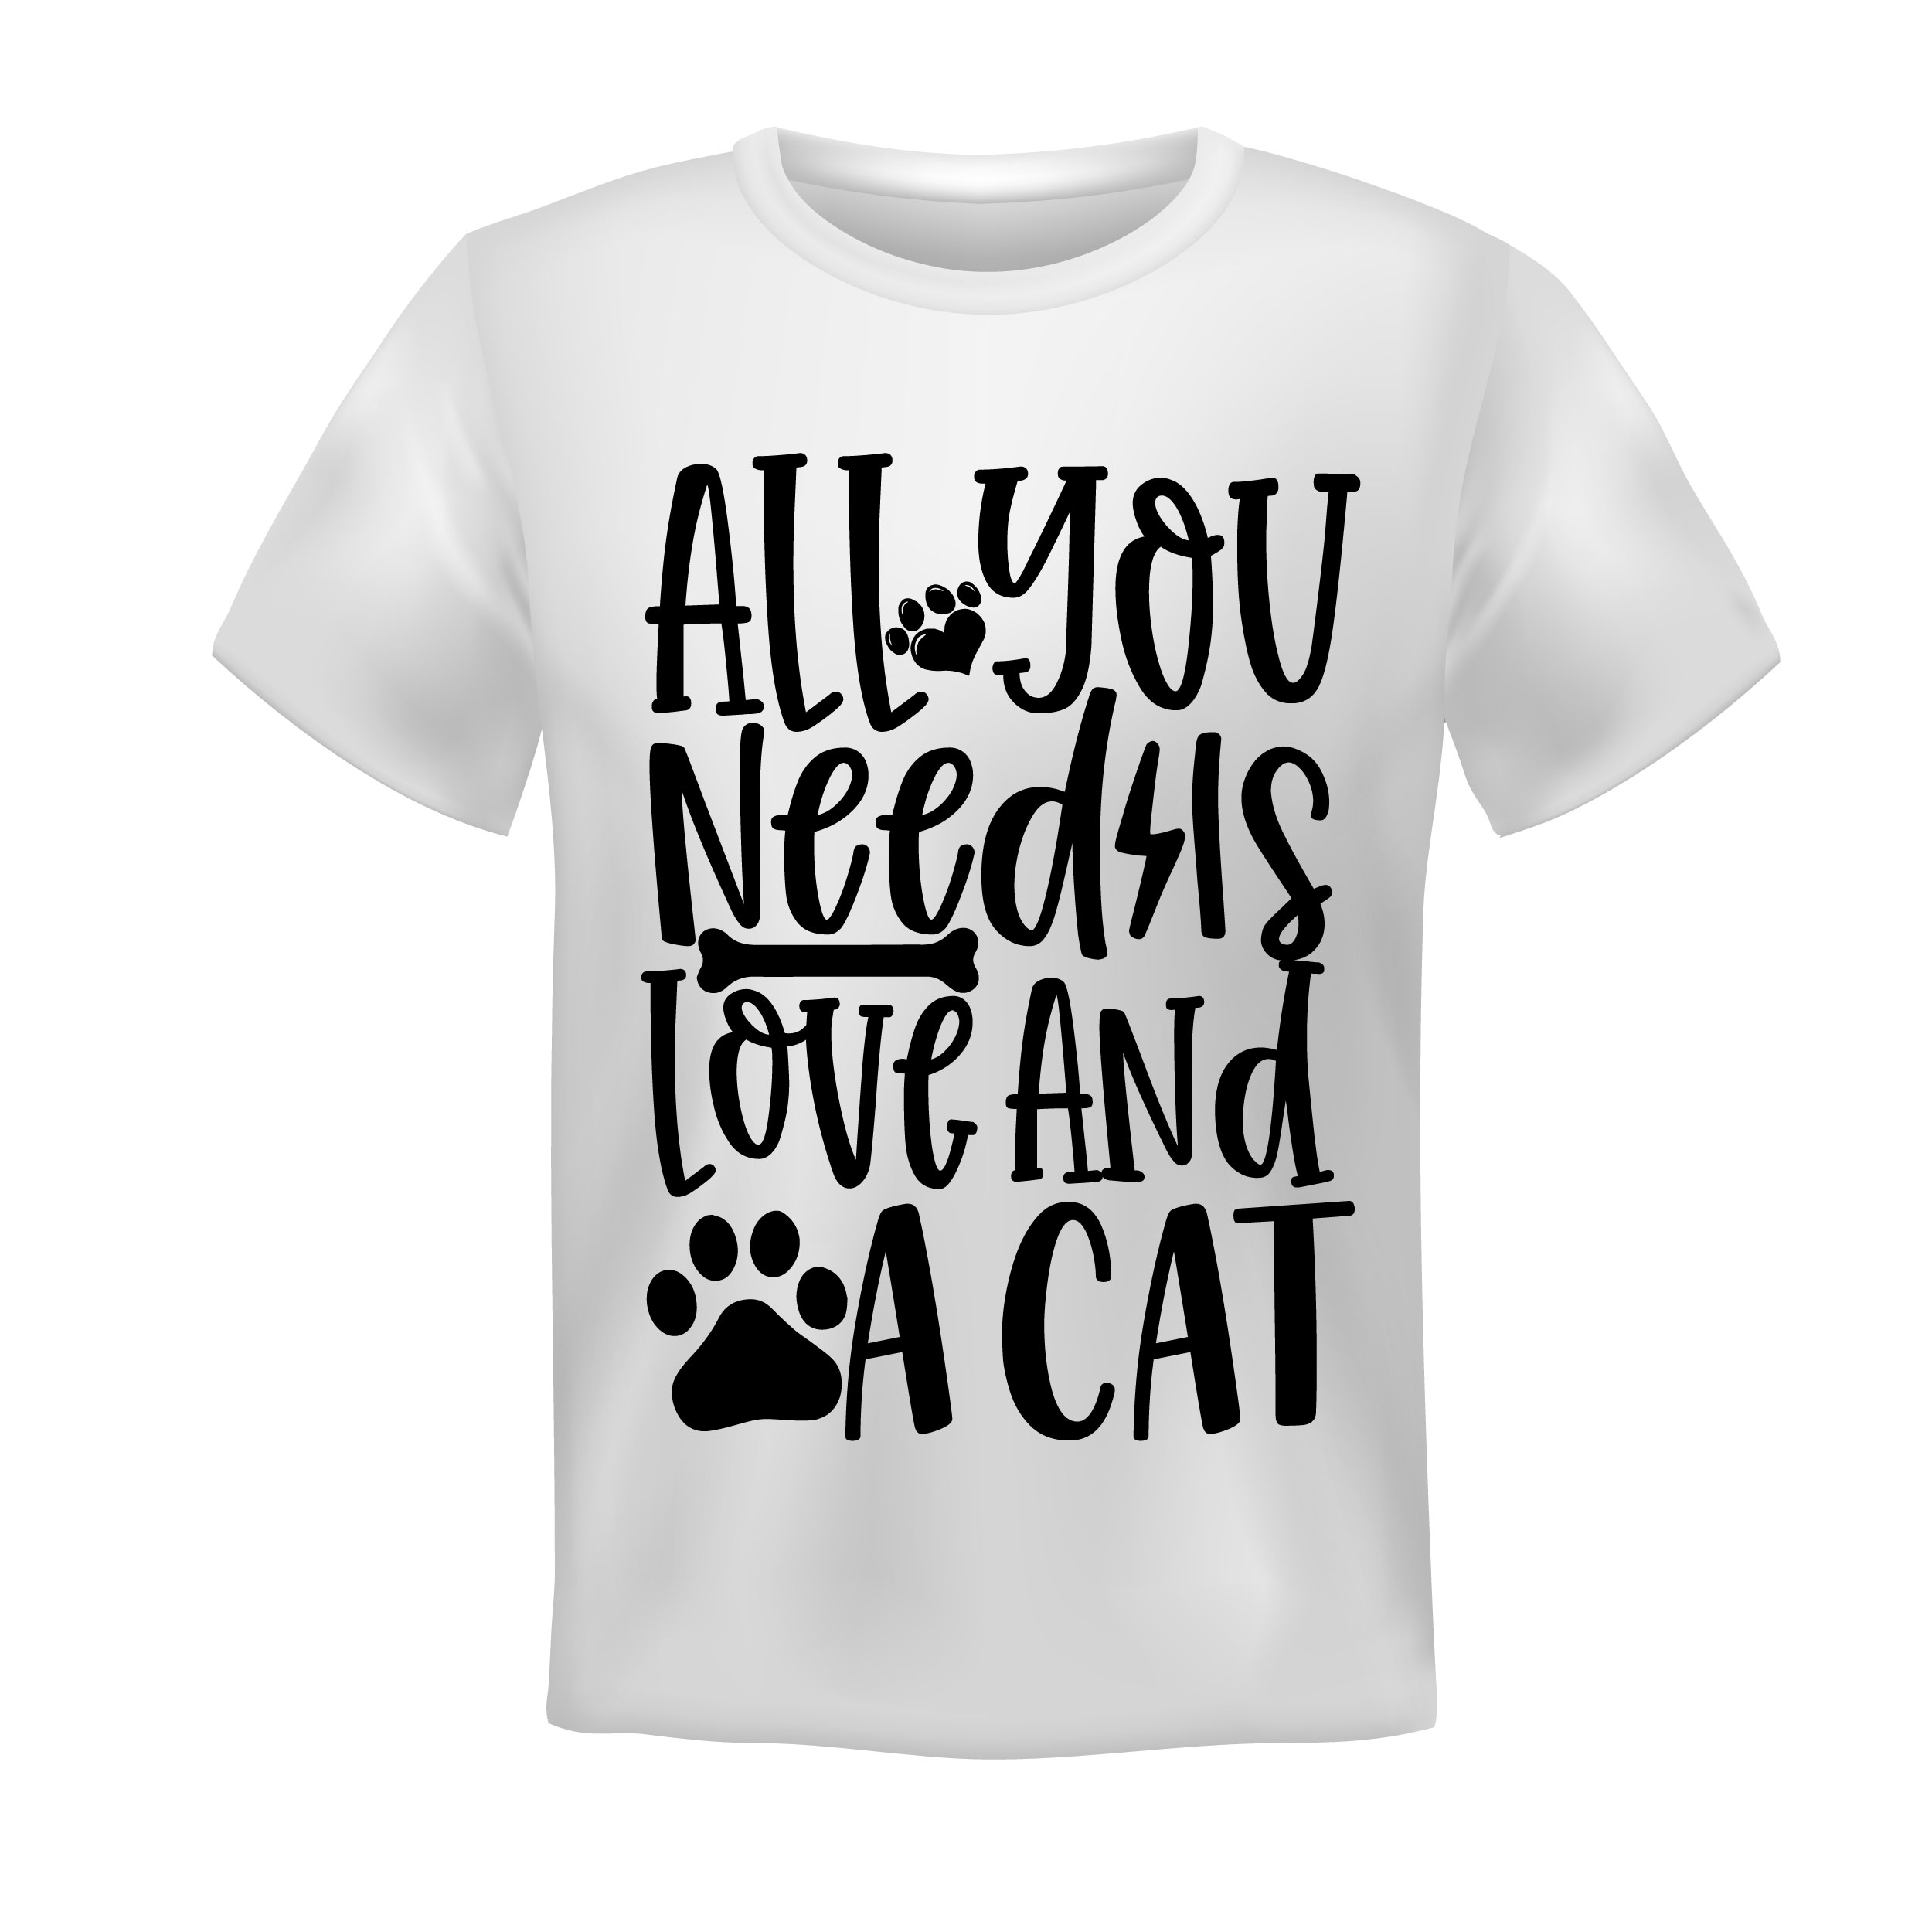 All-You-Need-Is-Love-And-A-Catjpg